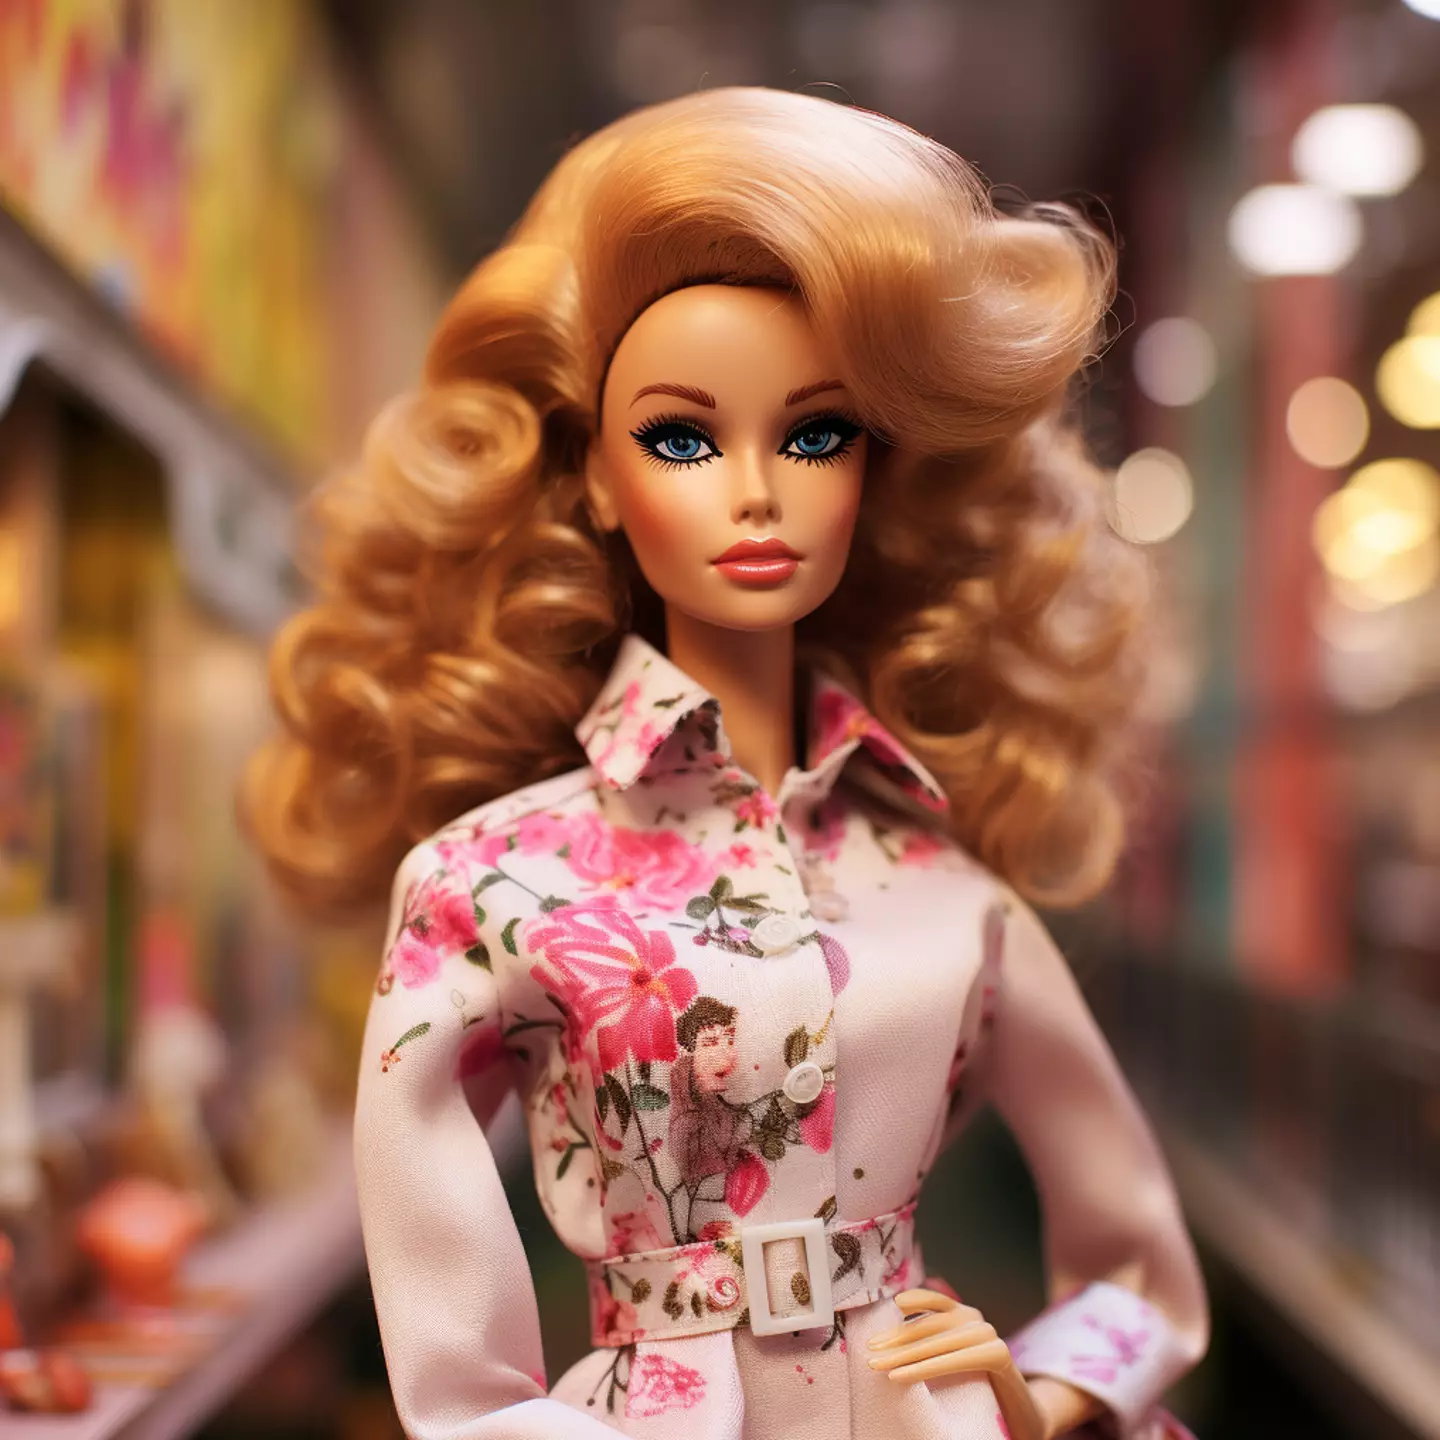 This Barbie is from Dublin.